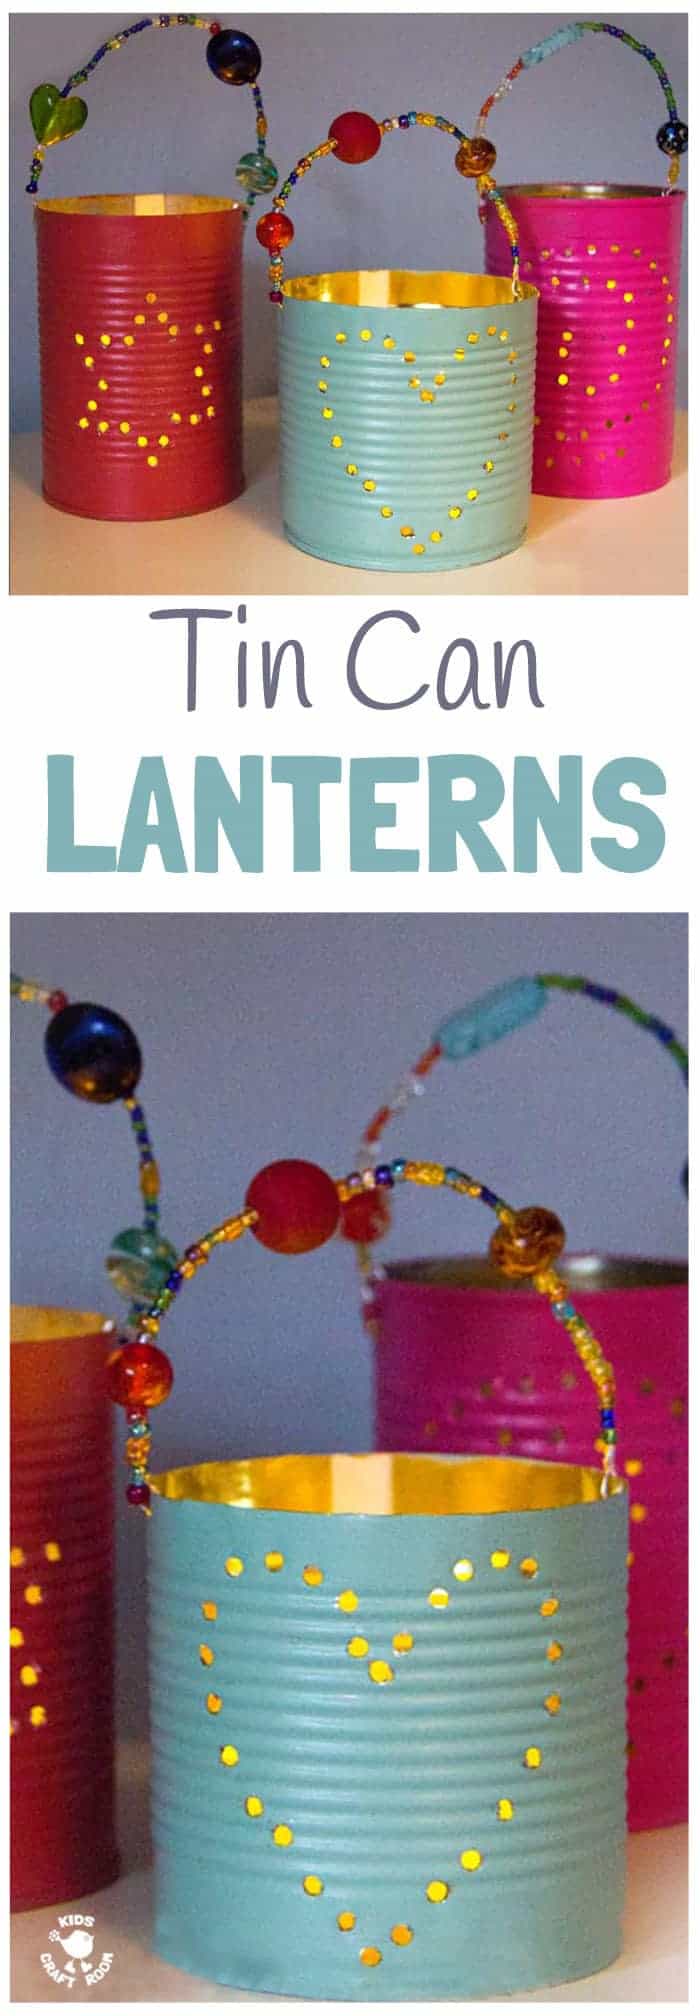 TIN CAN LANTERNS are beautiful homemade gifts kids can make. These DIY luminaries are easy to make and look stunning.